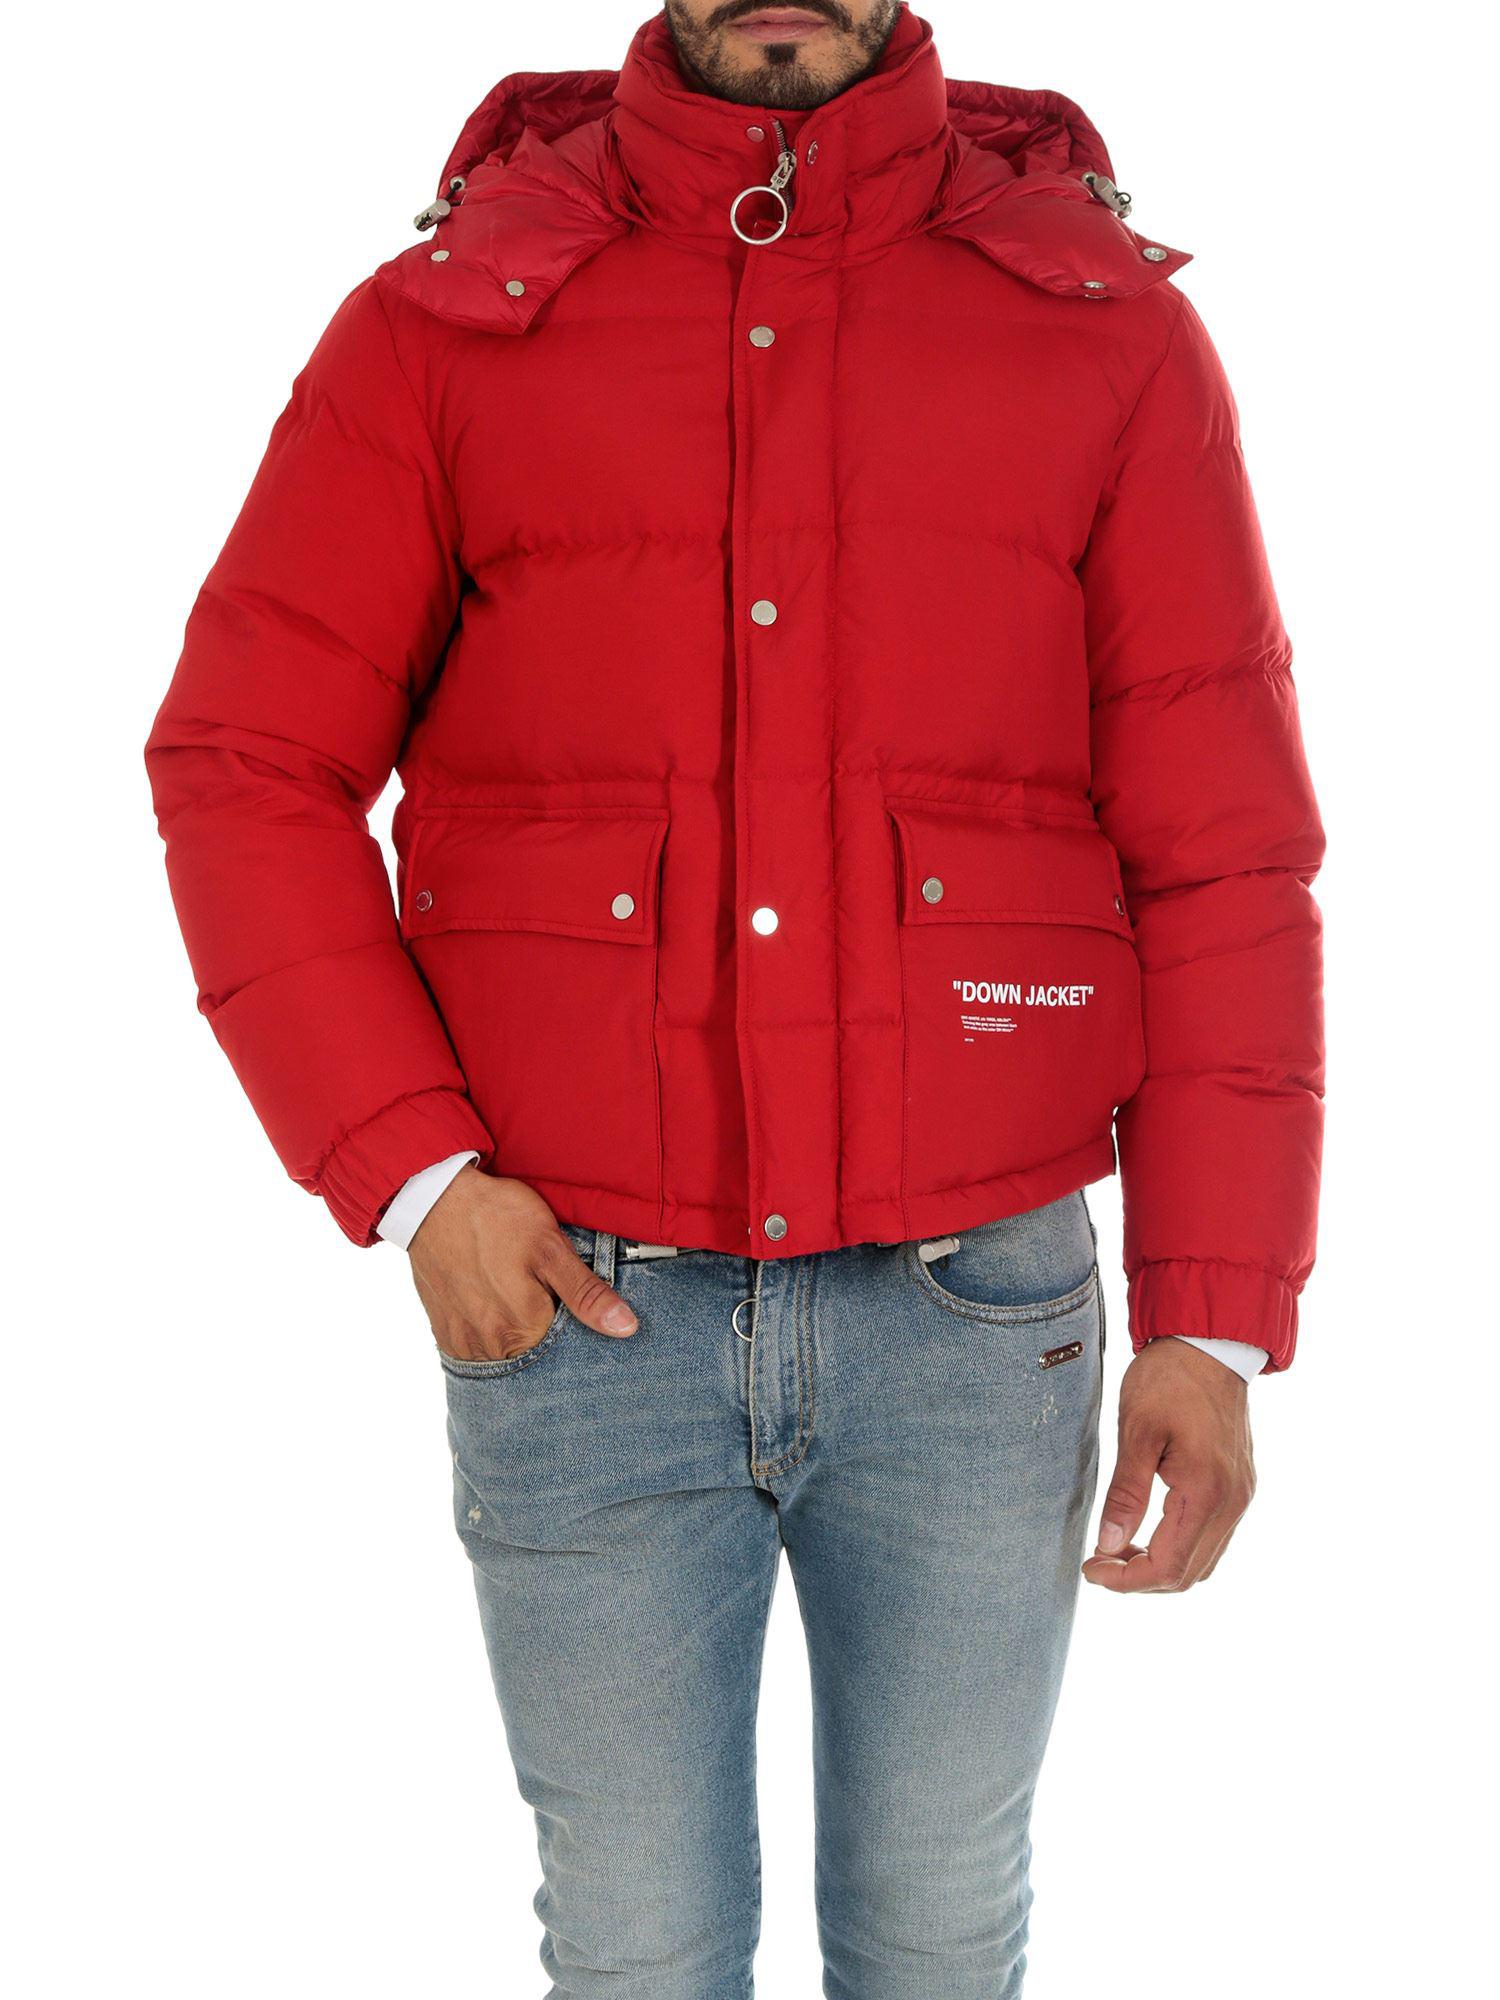 off white puffer jacket Shop Clothing & Shoes Online